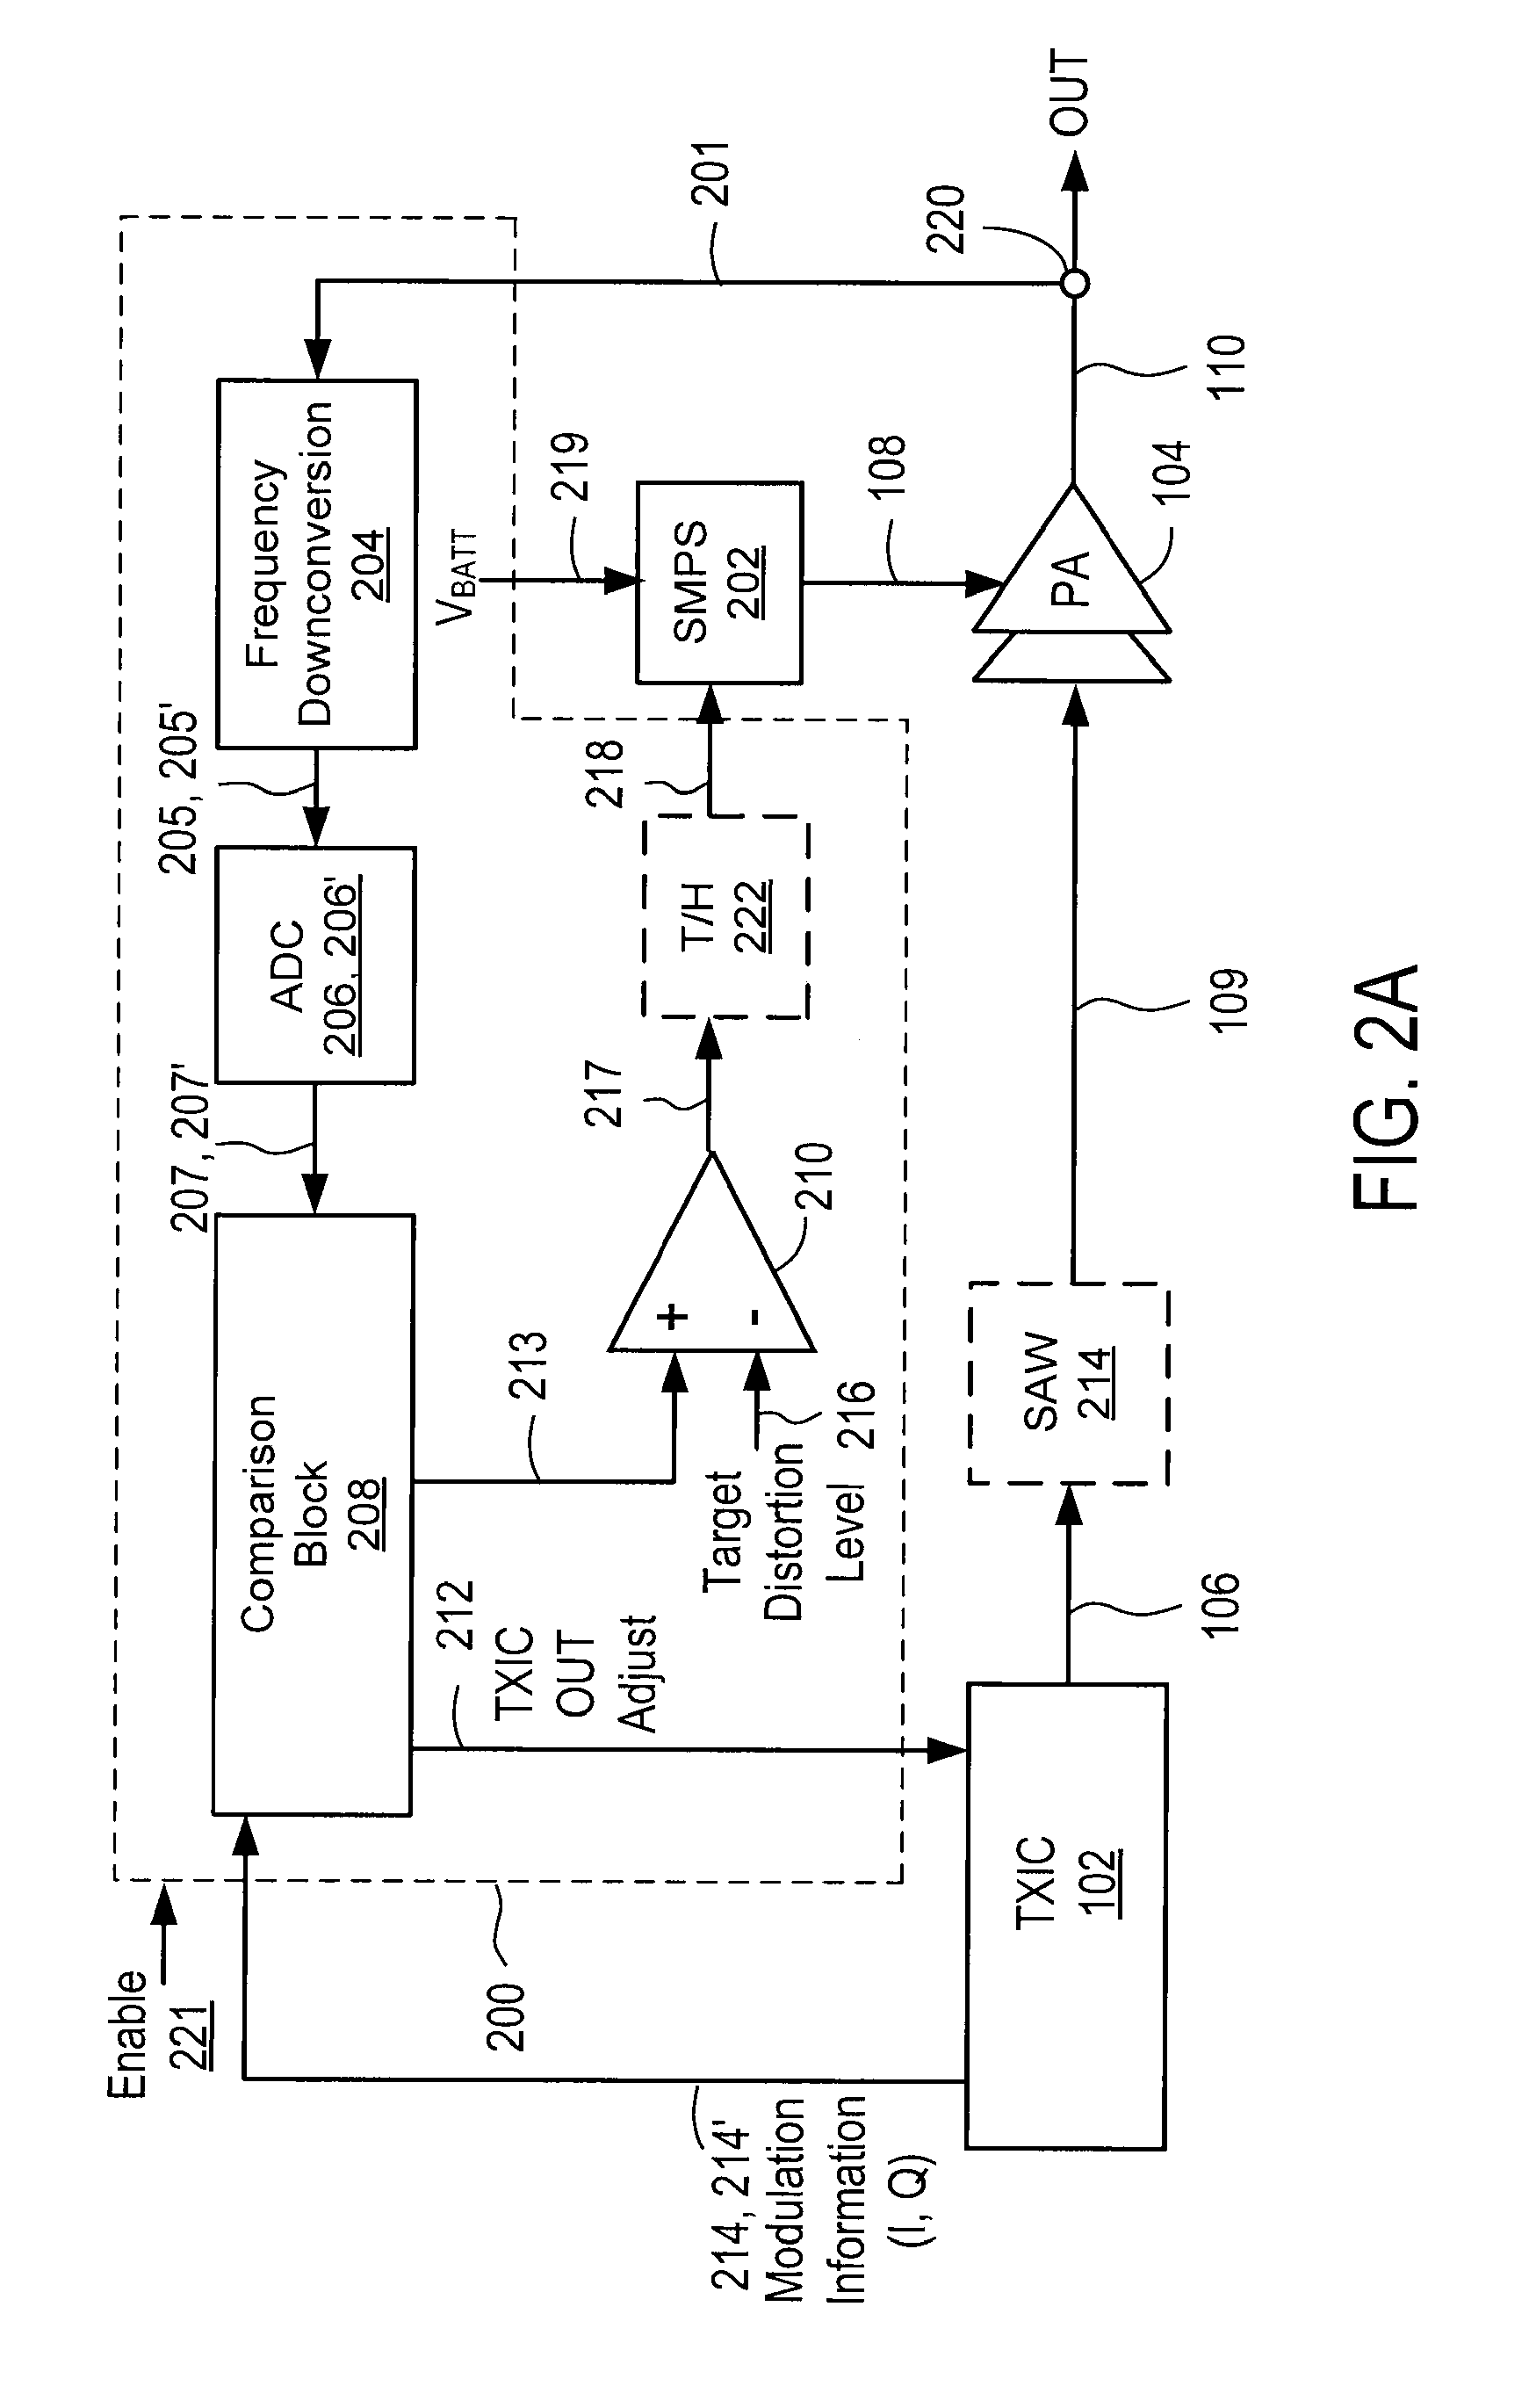 RF power amplifier controlled by estimated distortion level of output signal of power amplifier